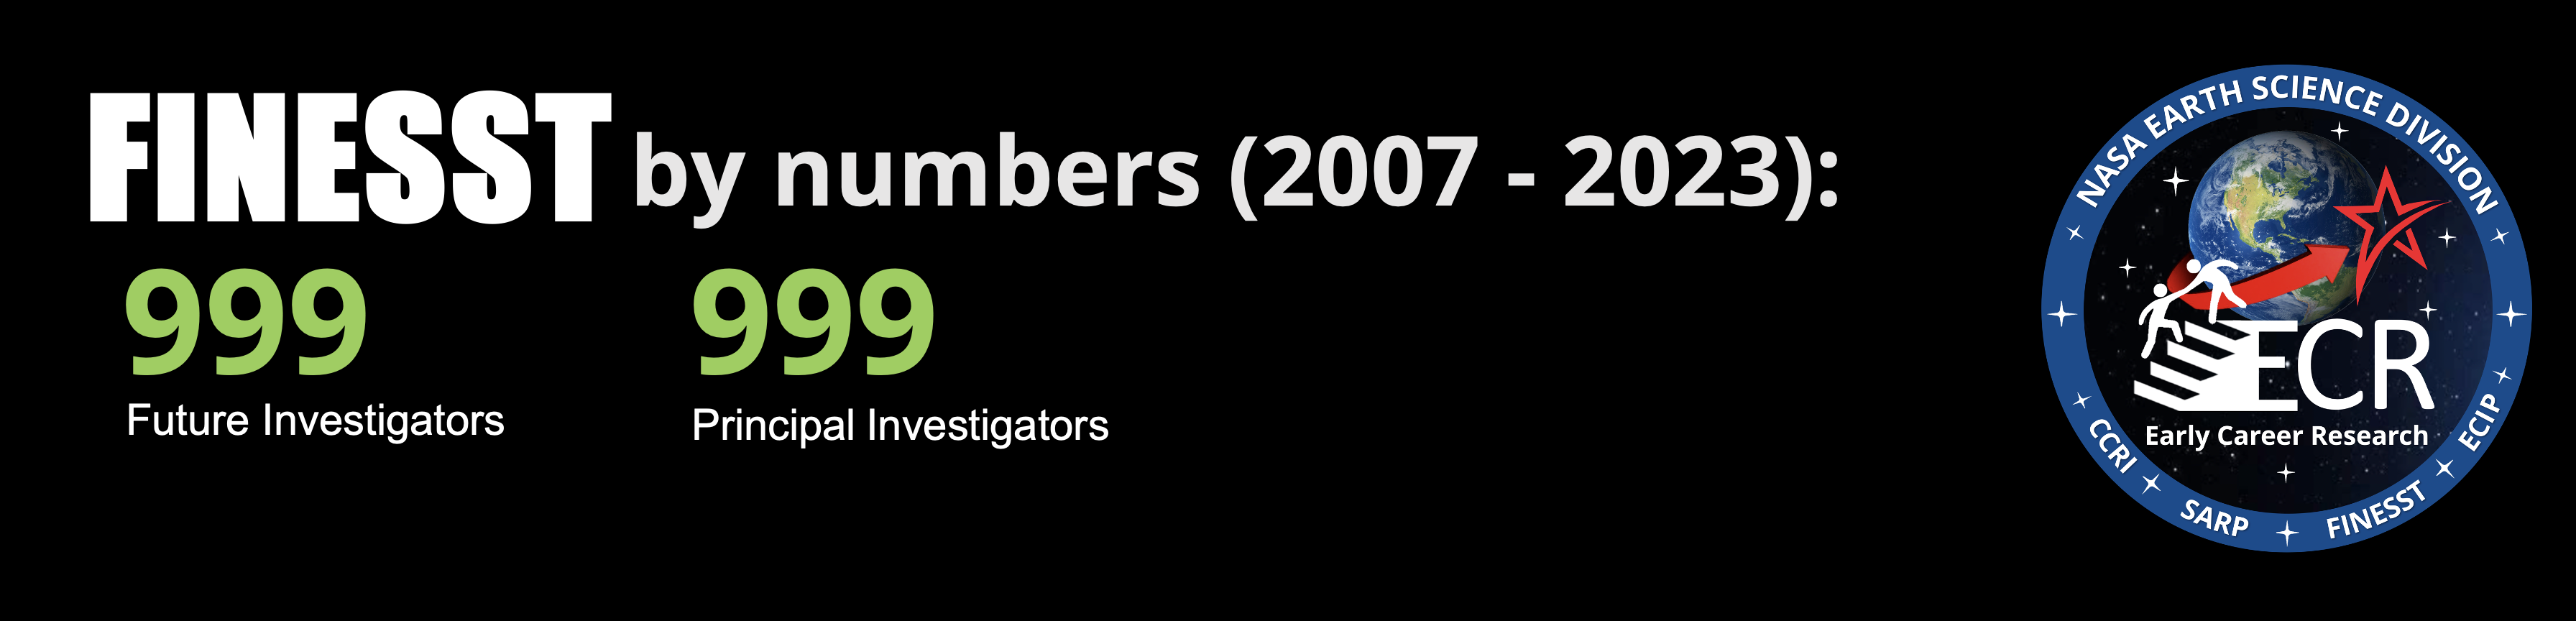 FINESST by the numbers, from 2007-2023, includes 999 Future Investigators with 999 mentors, or PIs. The numbers are on a black background with the ECR graphic to the right.